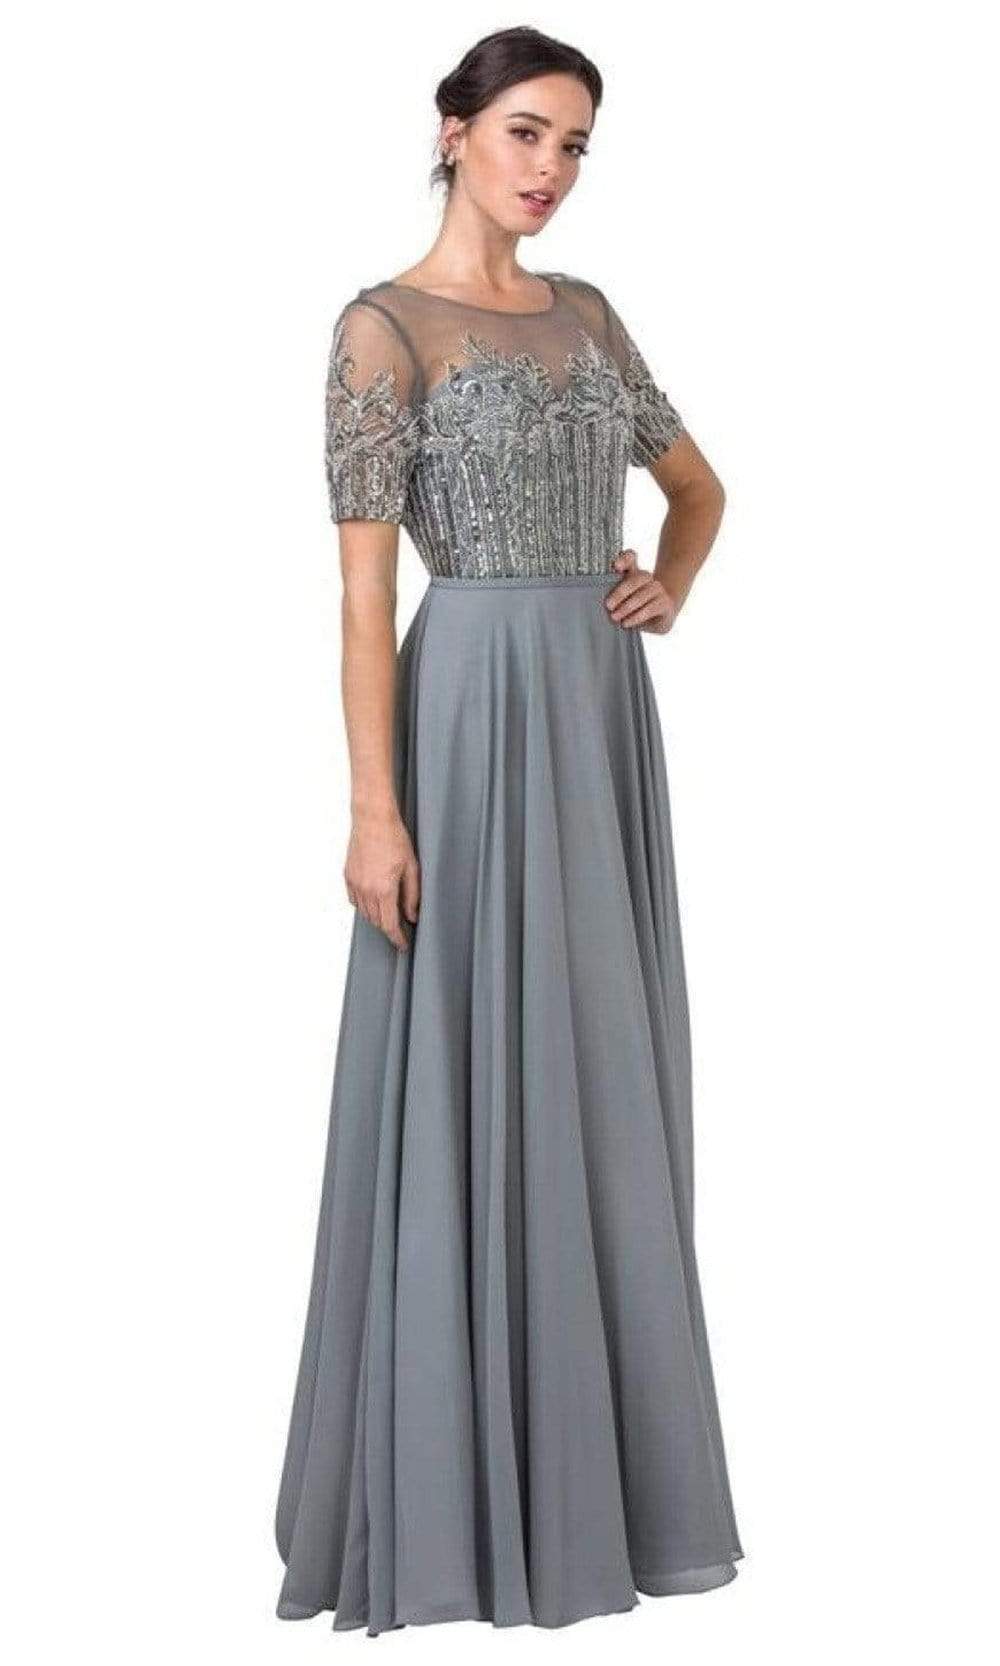 Aspeed Design - M2285 Short Sleeve Bedazzled A-Line Dress Mother of the Bride Dresses XXS / Charcoal